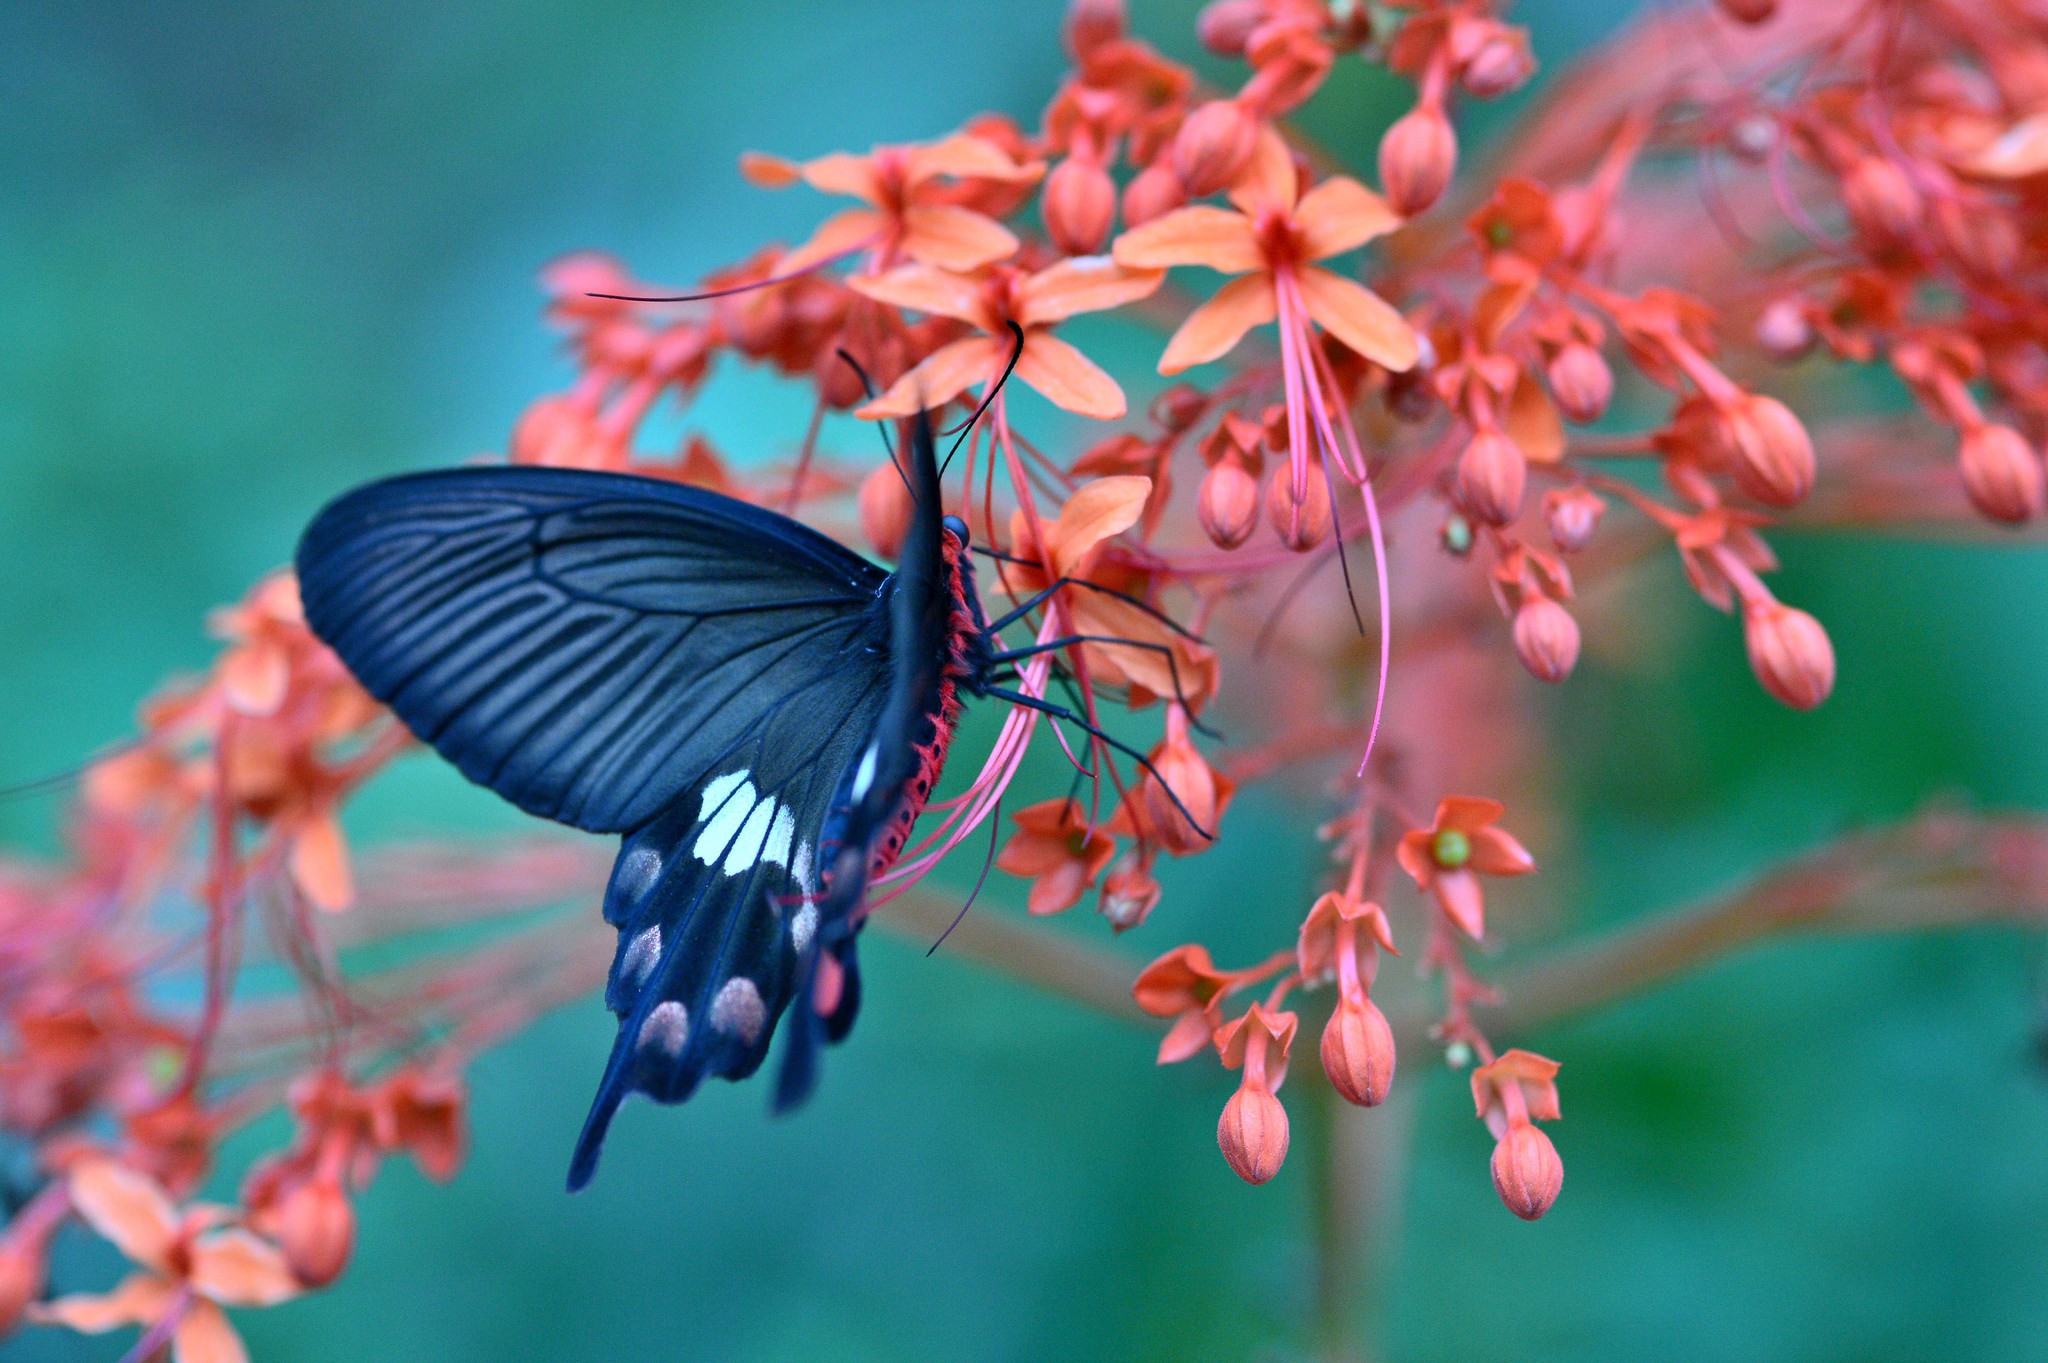 Butterfly on flower amazing wallpaper | nature and landscape